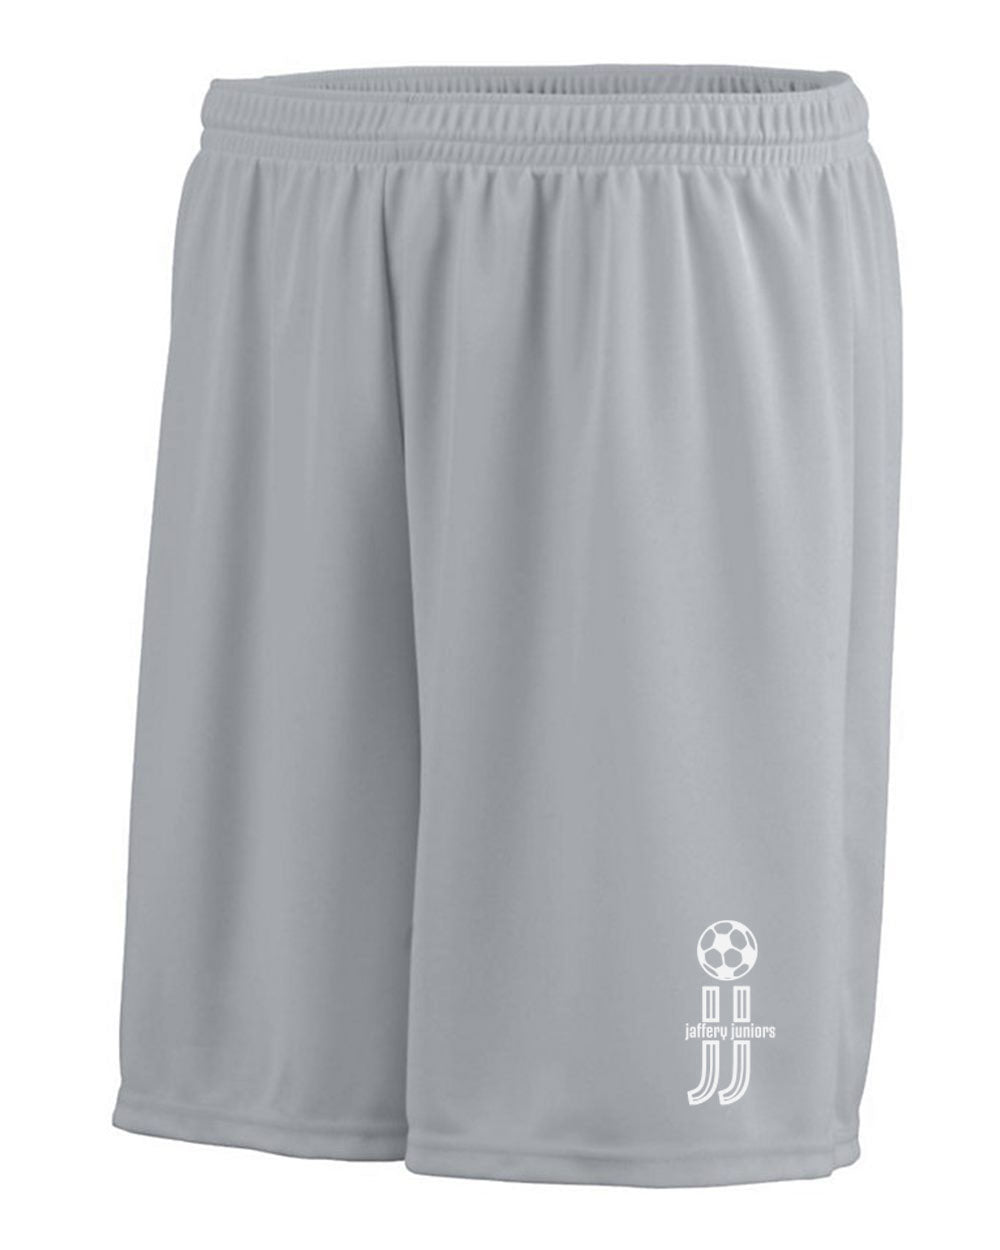 JJ's Shorts (youth/adult)